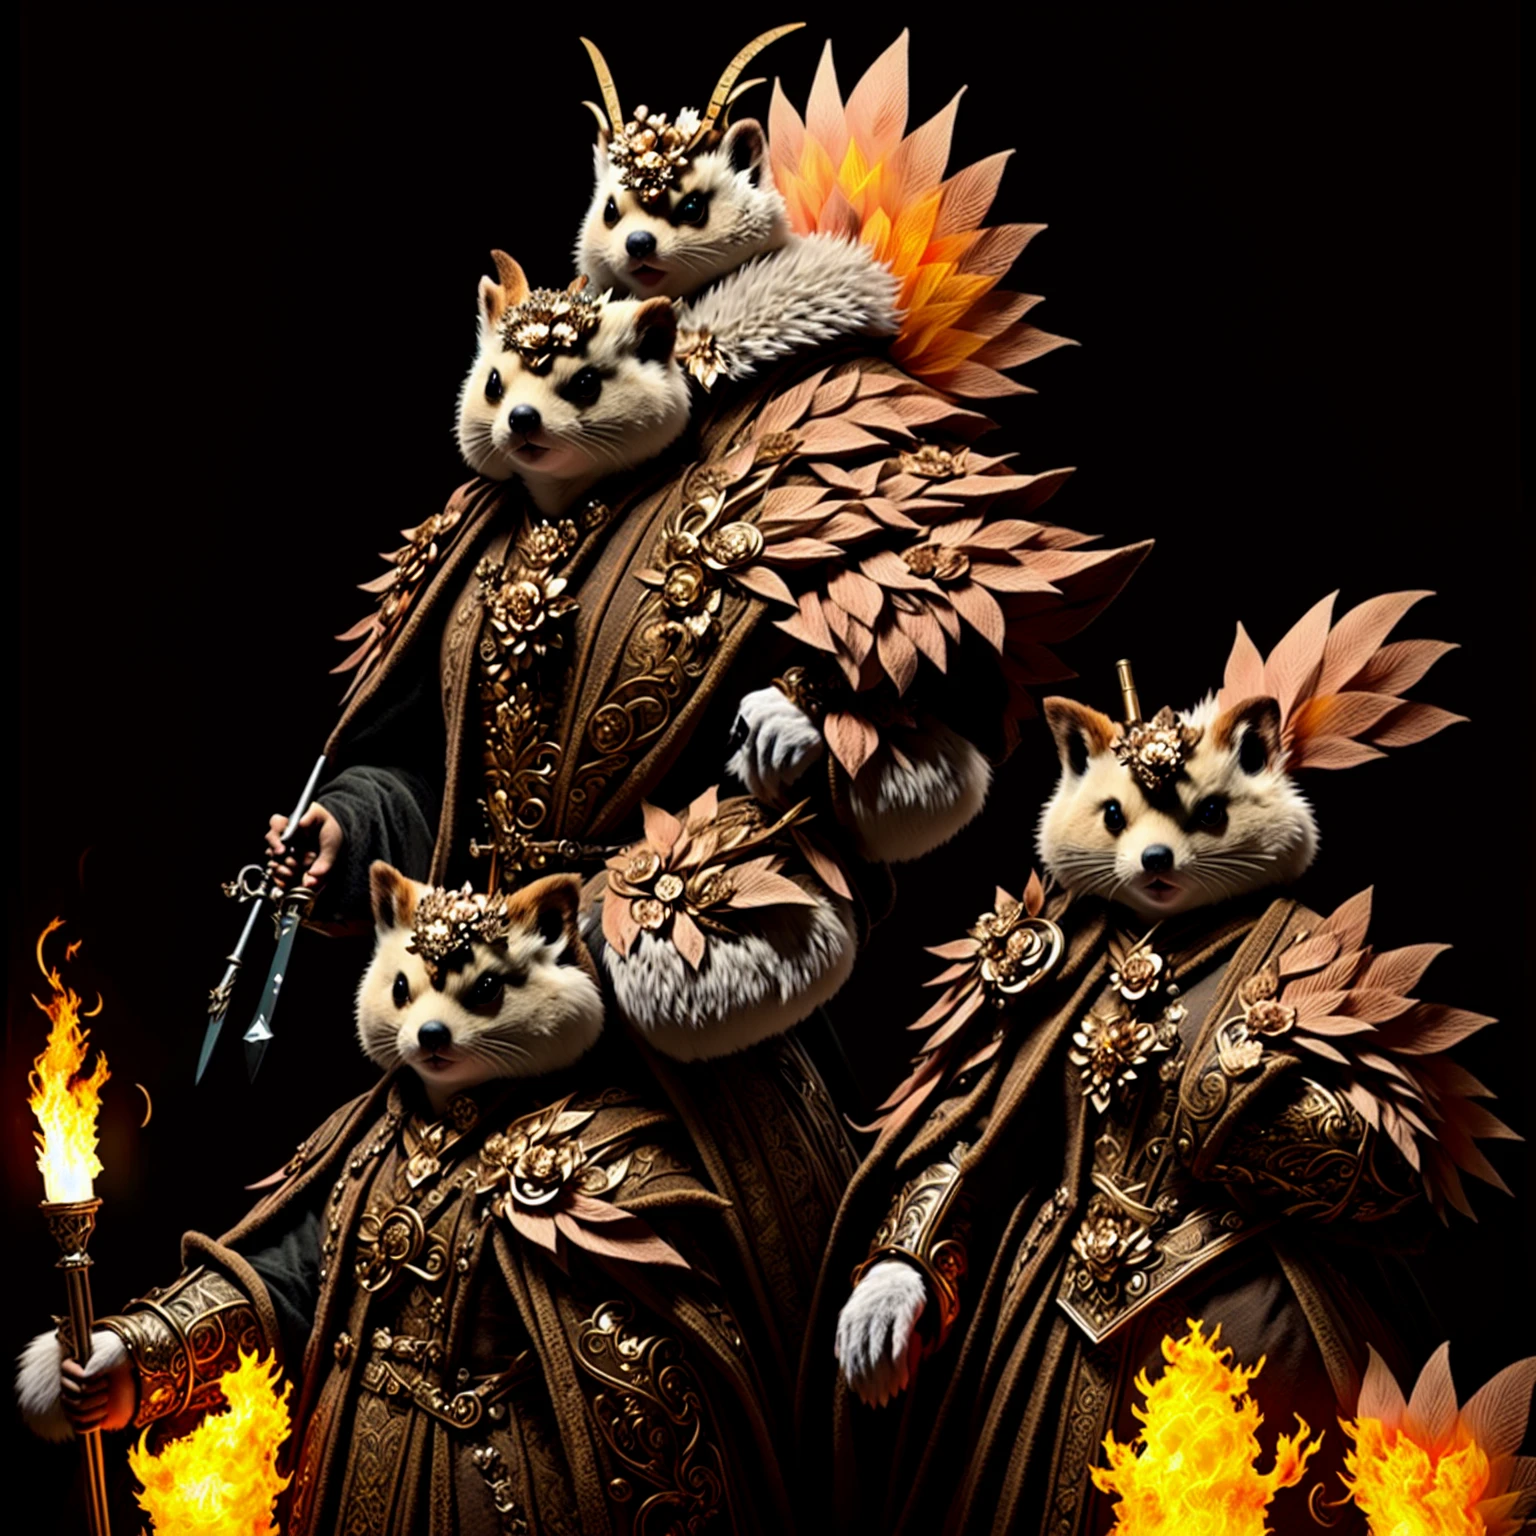 Araffe dressed in a costume with a flower helmet and a sword, hedgehog magus, kitsune inspired armor, tabaxi monk, ornate cosplay, hyperdetailed fantasy character, the squirrel king, costumed anthropomorphic otter, kitsune holding torch, dressed in an old suit, fantasy character photo, portrait of a forest mage, Portrait photo